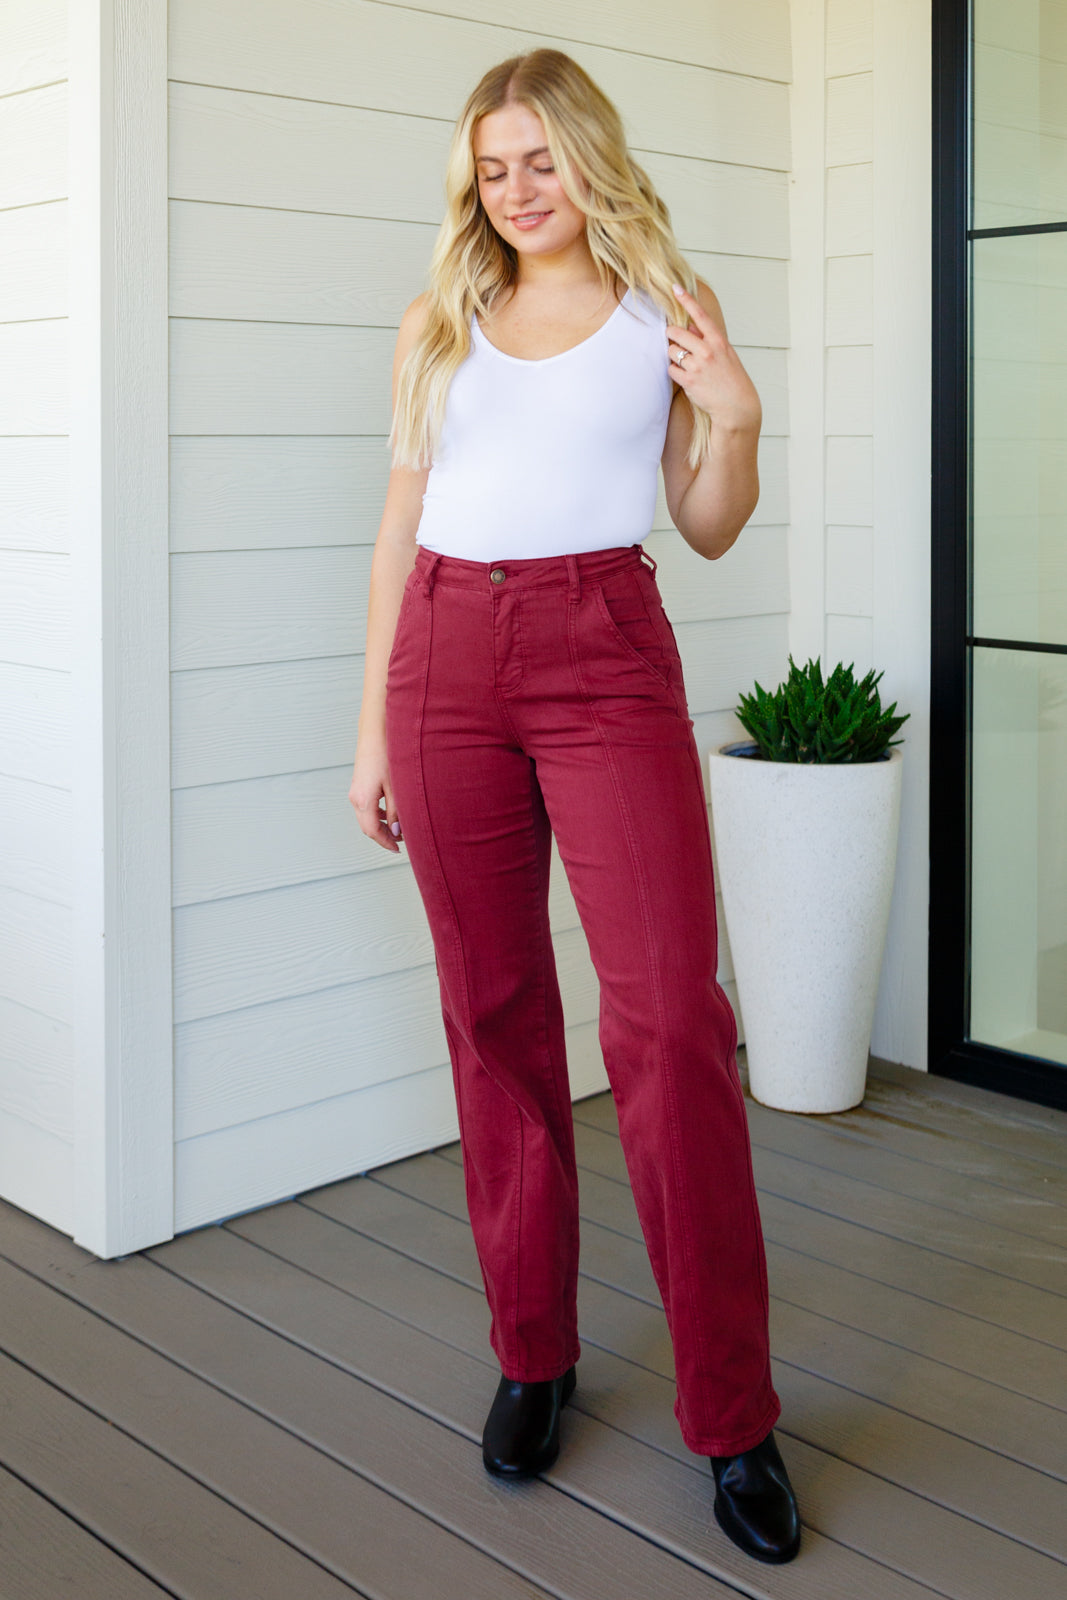 Introducing our Phoebe High Rise Jeans from Judy Blue, designed with a flattering center front seam and a comfortable, straight-leg silhouette. Featured in a rich burgundy, each piece is garment-dyed for a uniquely personal touch